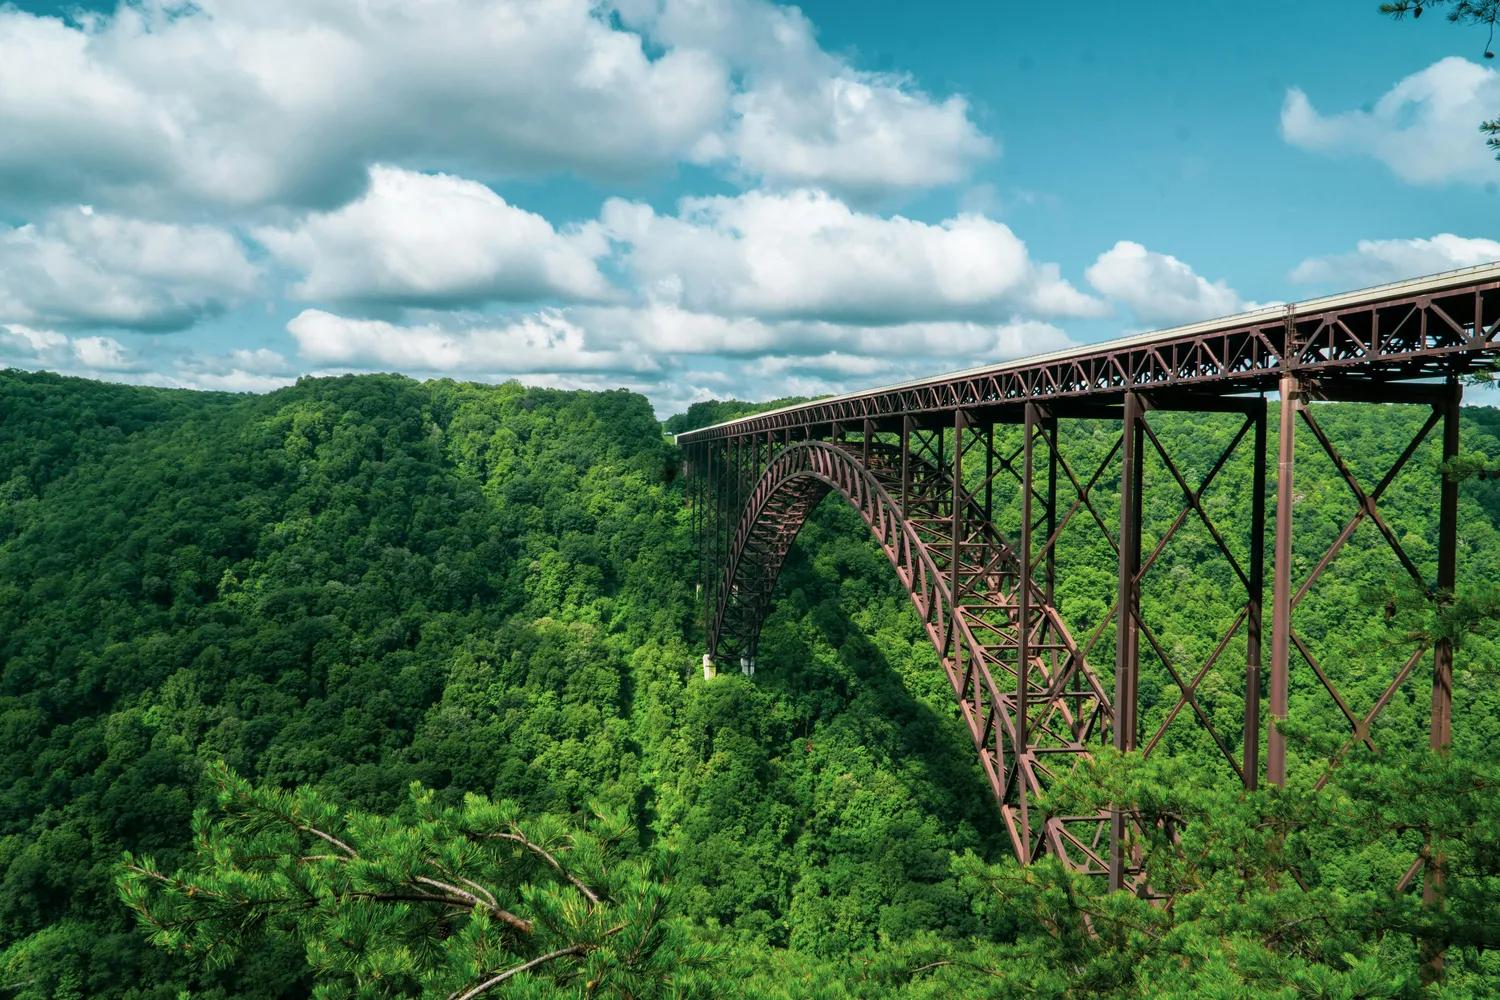 Find out the top 10 highest earning jobs in West Virginia